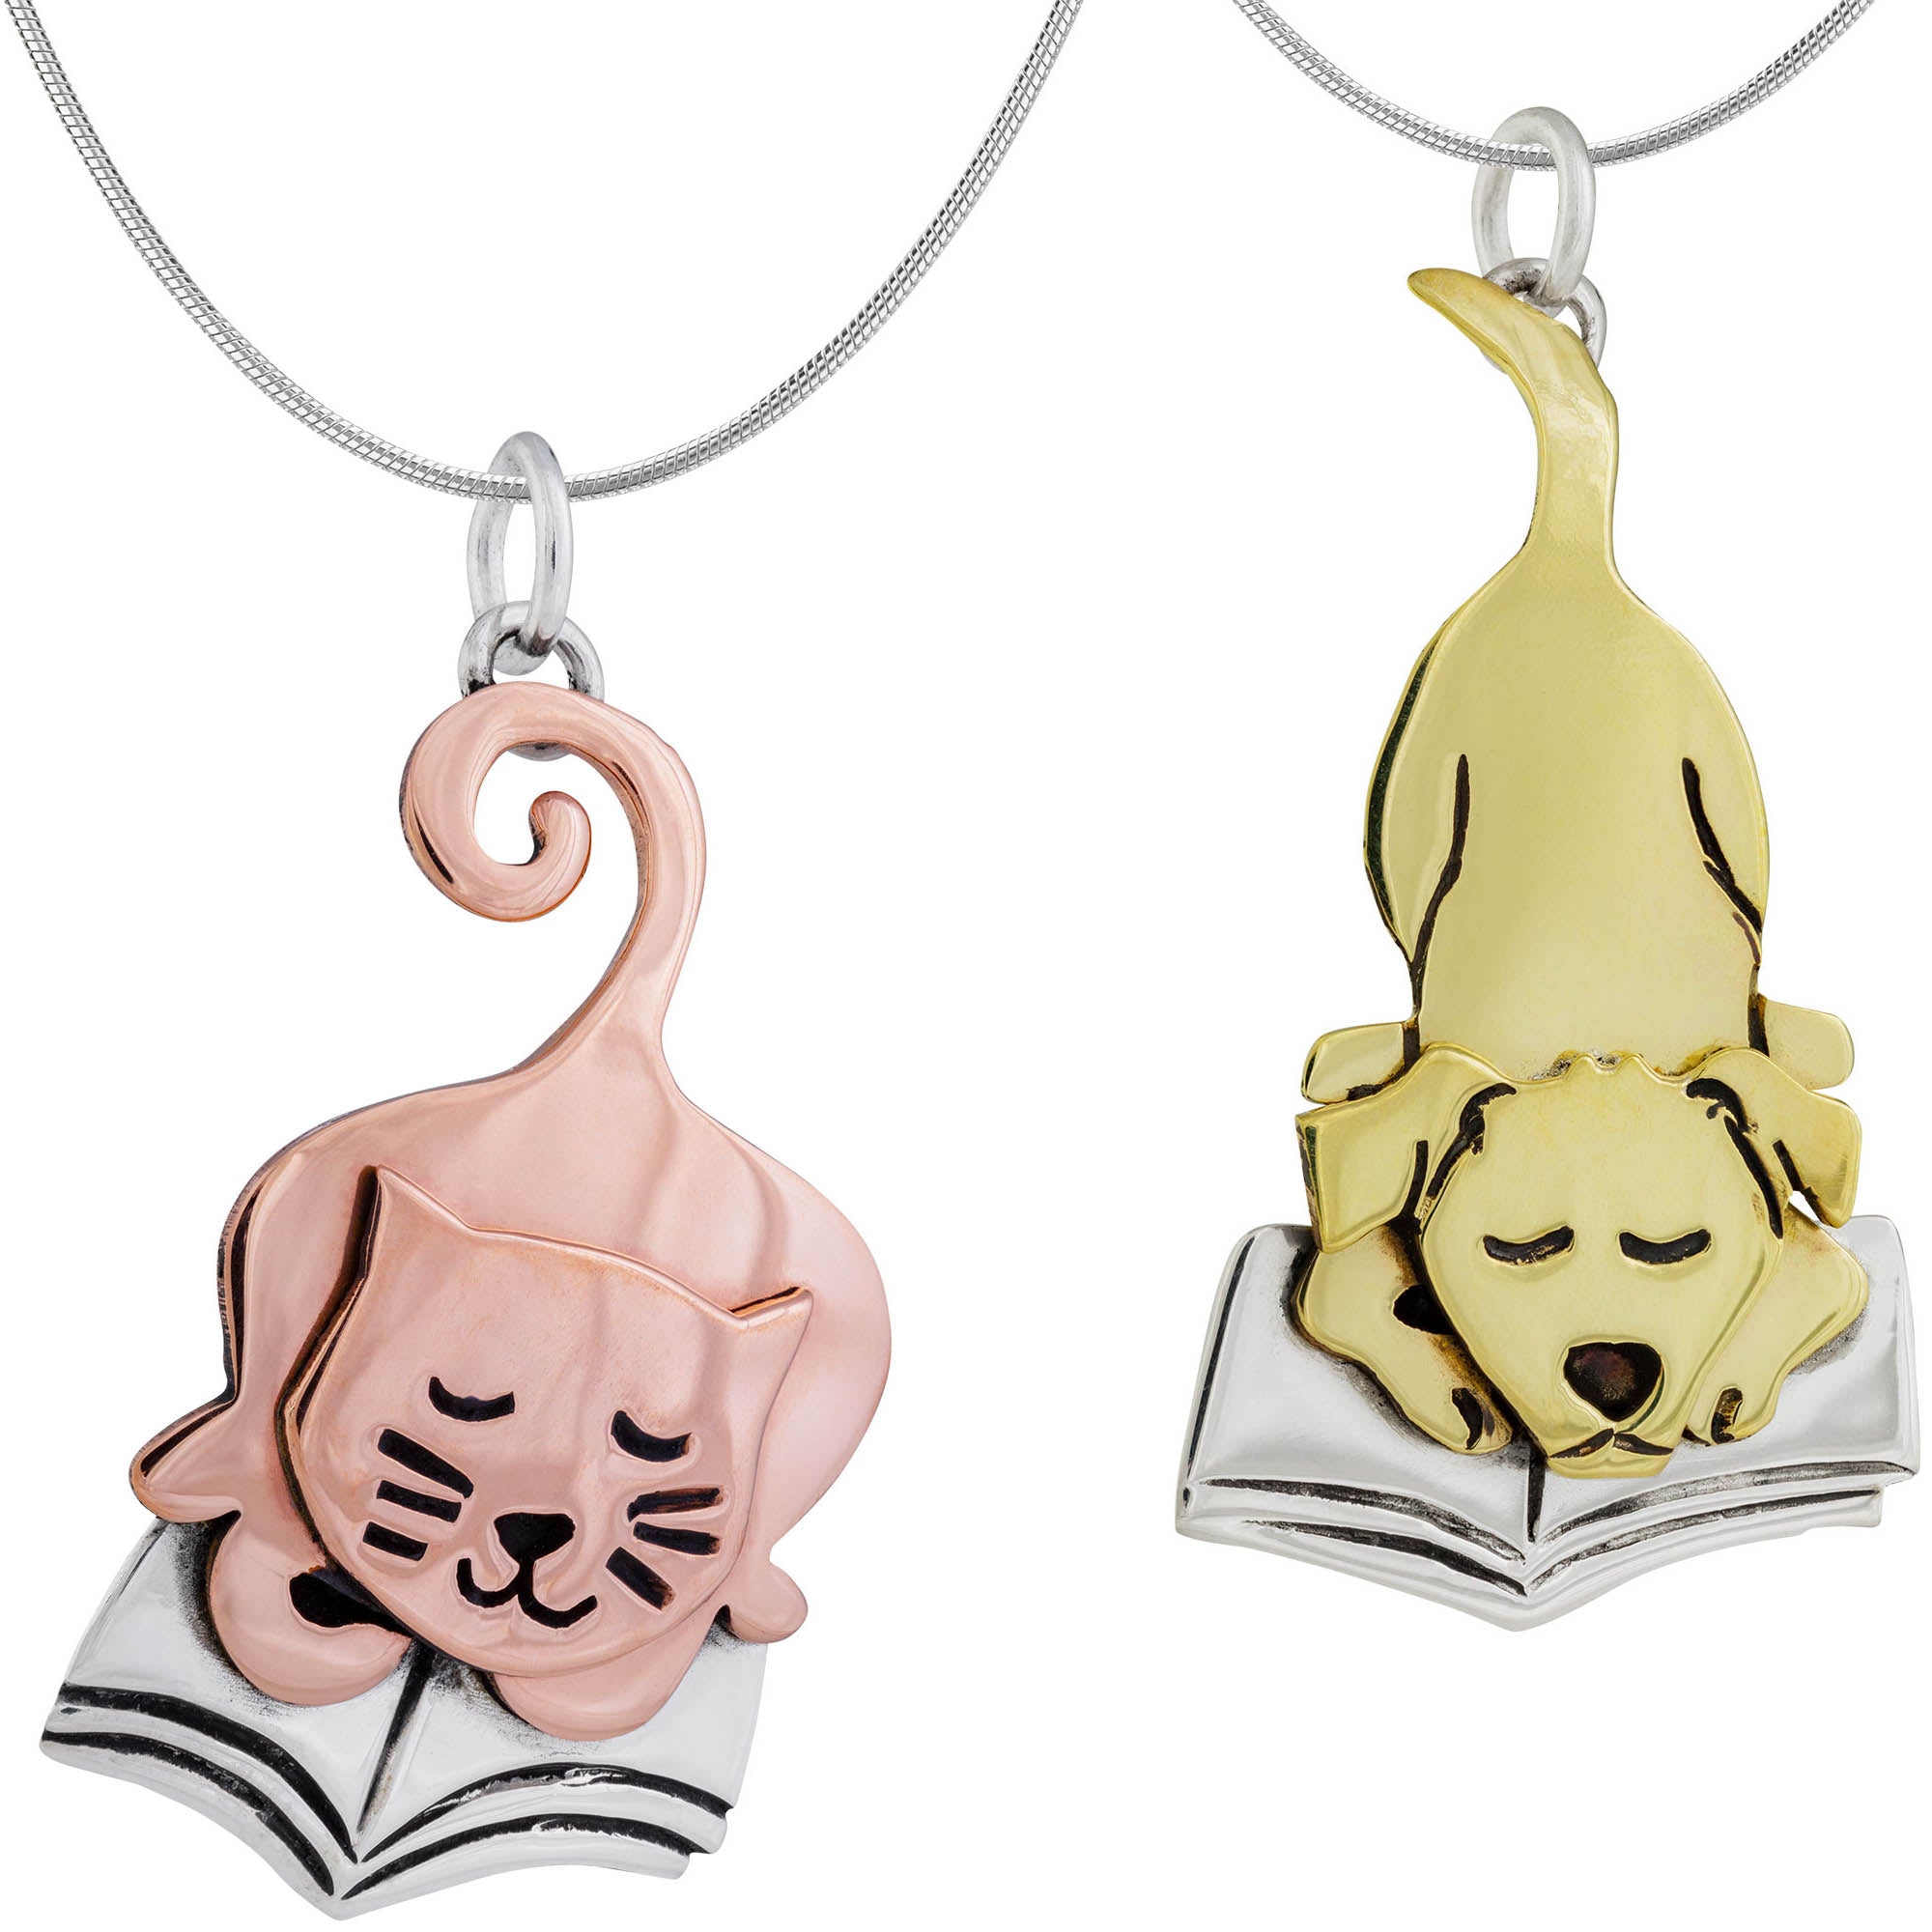 Pet Lover Book Club Sterling Necklace - Dog - With Sterling Cable Chain